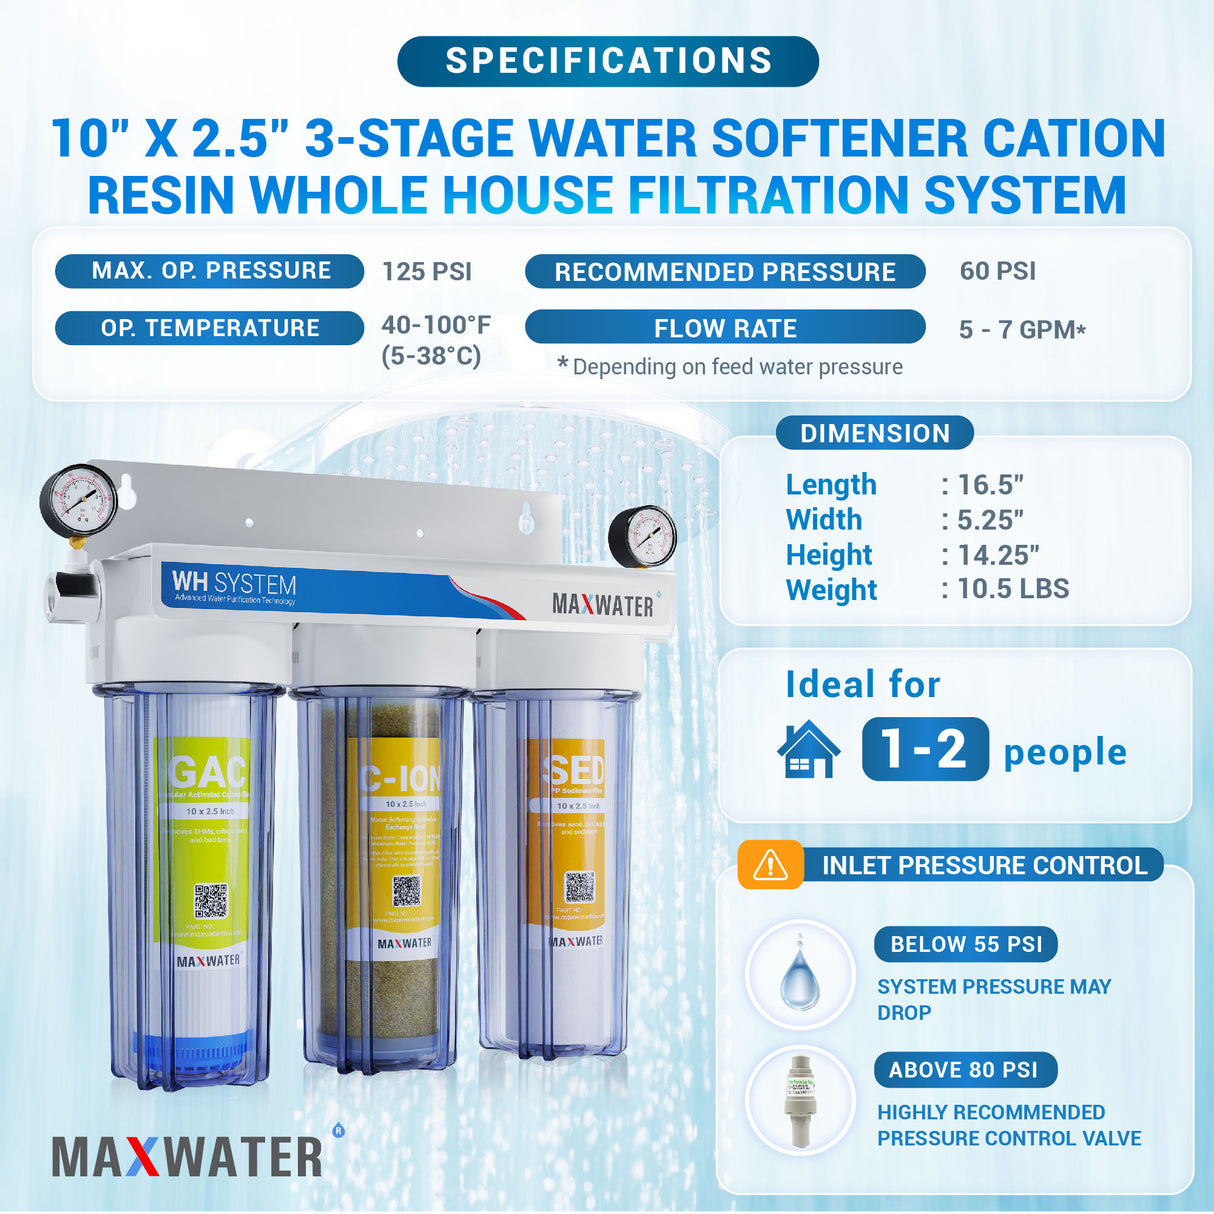 10” x 2.5" Whole House Water Softener with 3-Stage Cation Resin